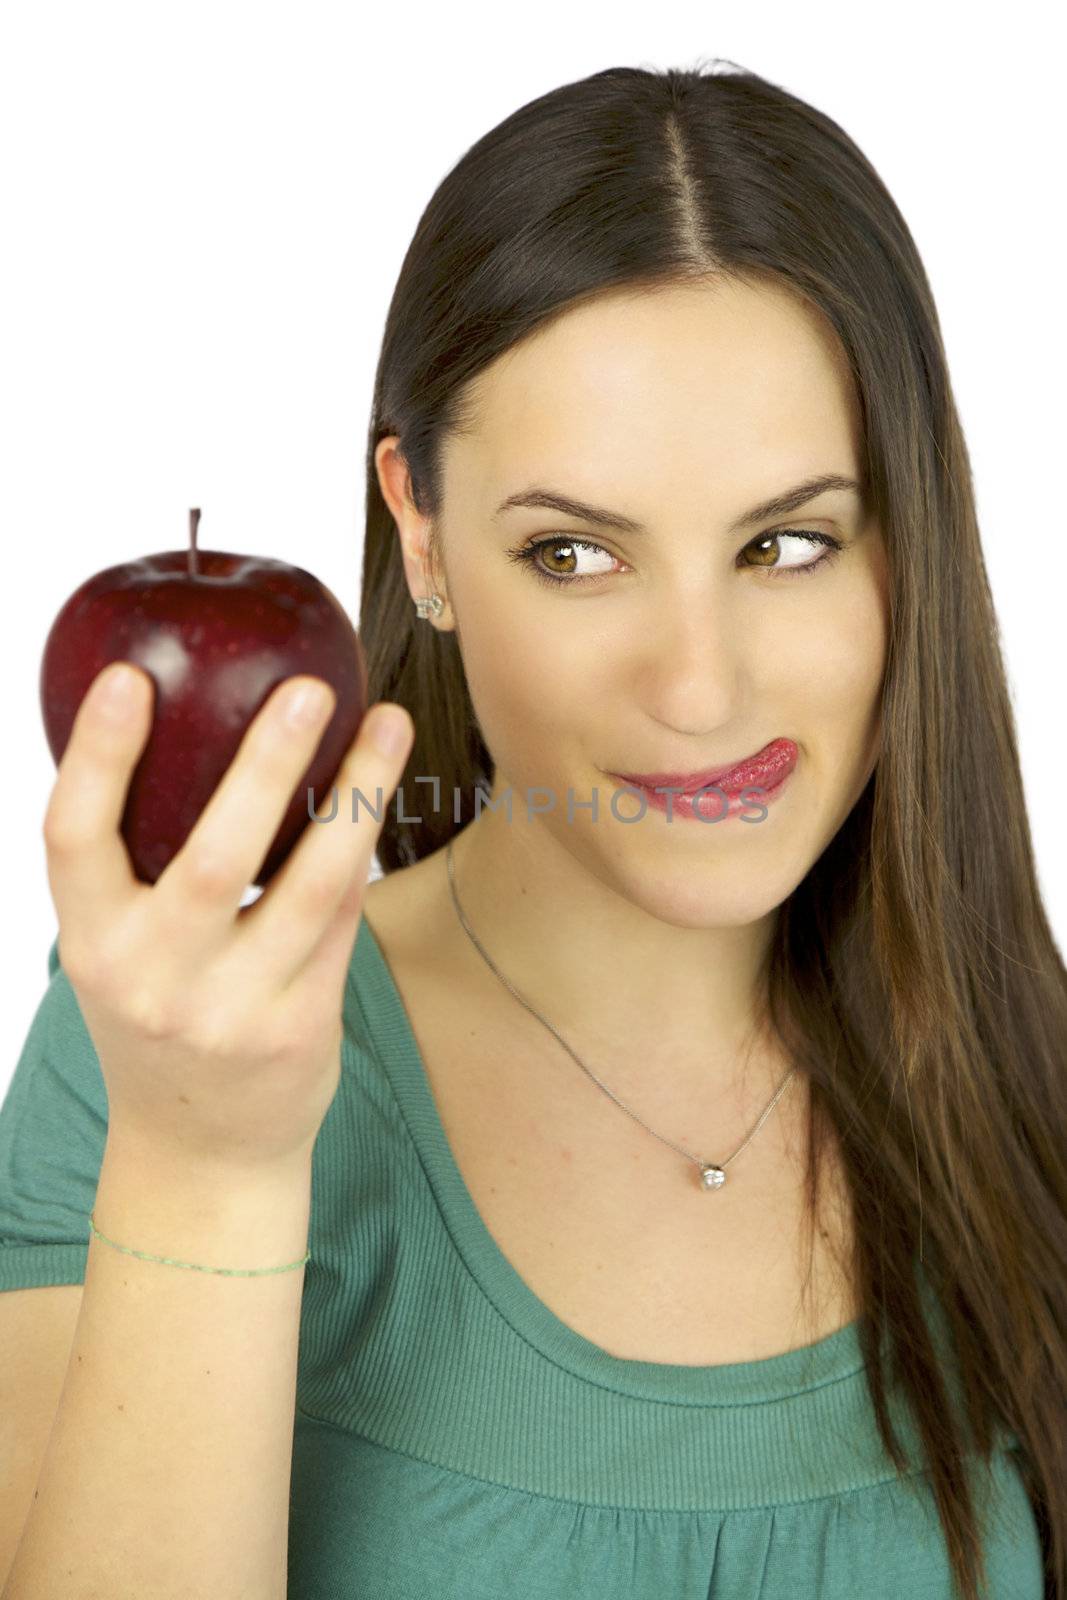 Girl hungry looking at red apple by fmarsicano